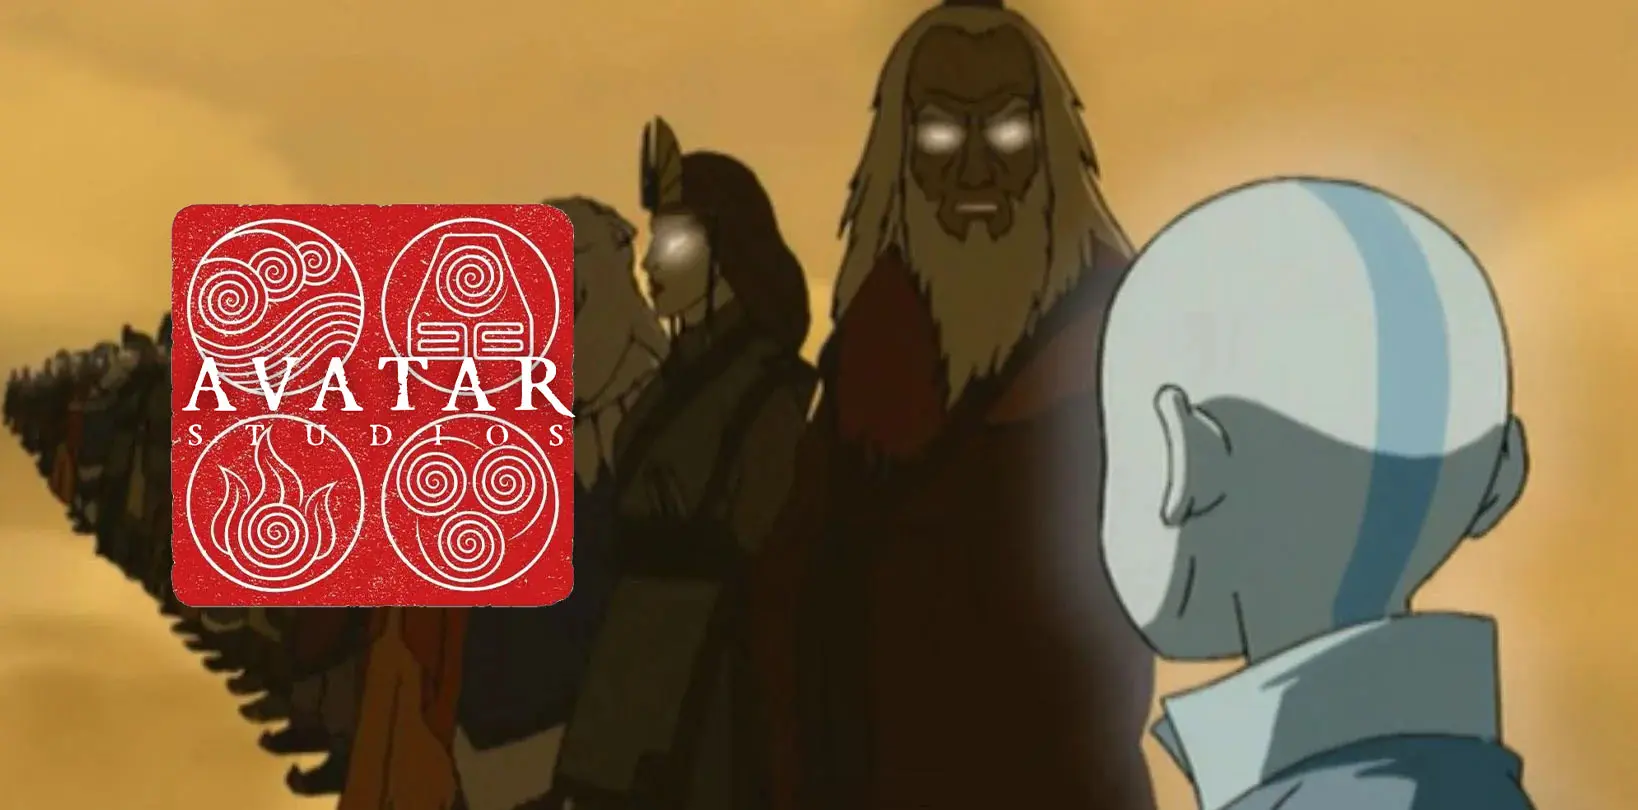 Avatar The Last Airbender  What Can We Expect From the New Avatar Studios   Den of Geek